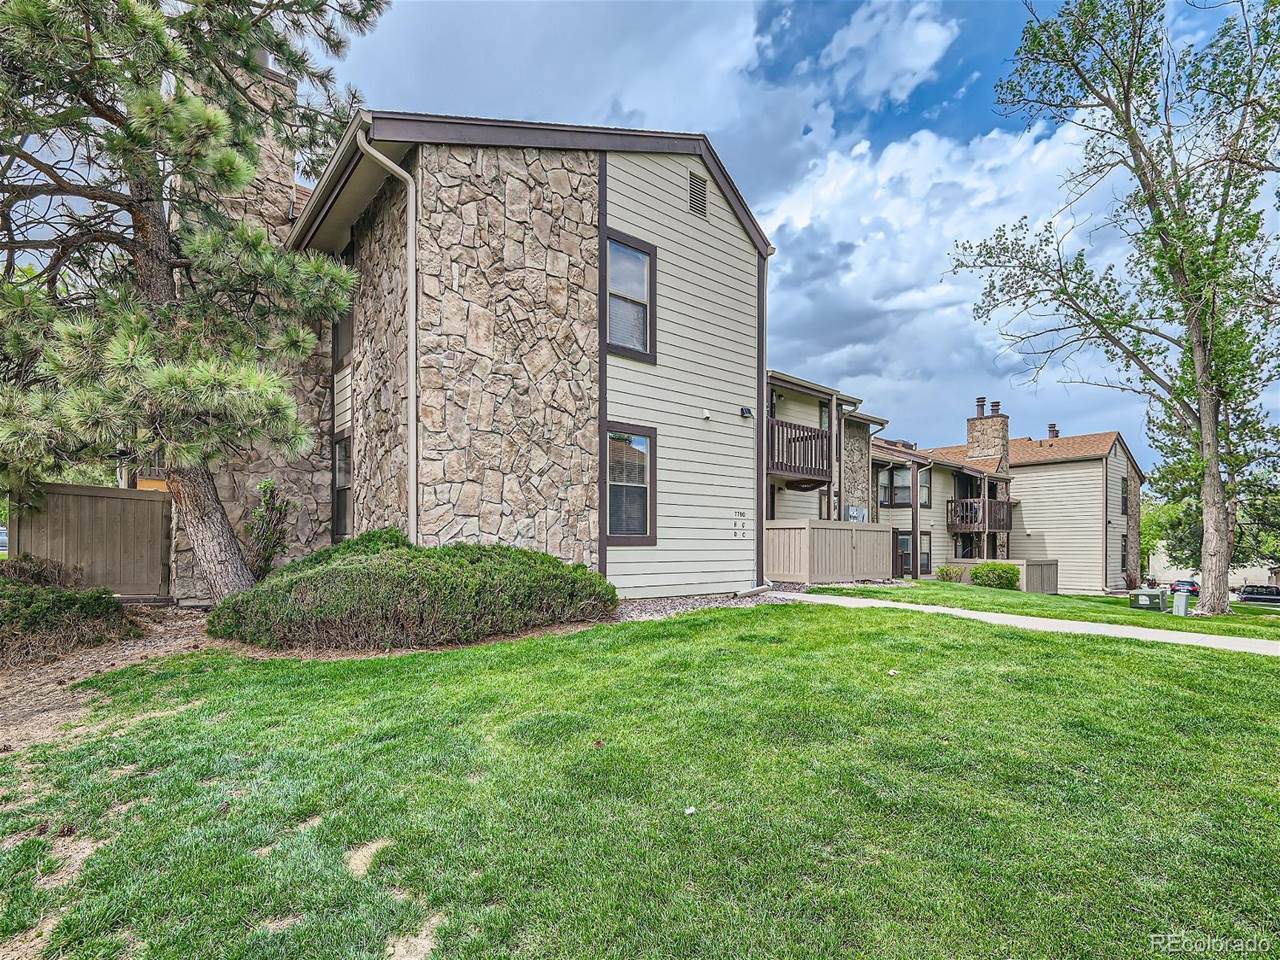 7790 West 87th Drive, #G, Arvada, CO 80005